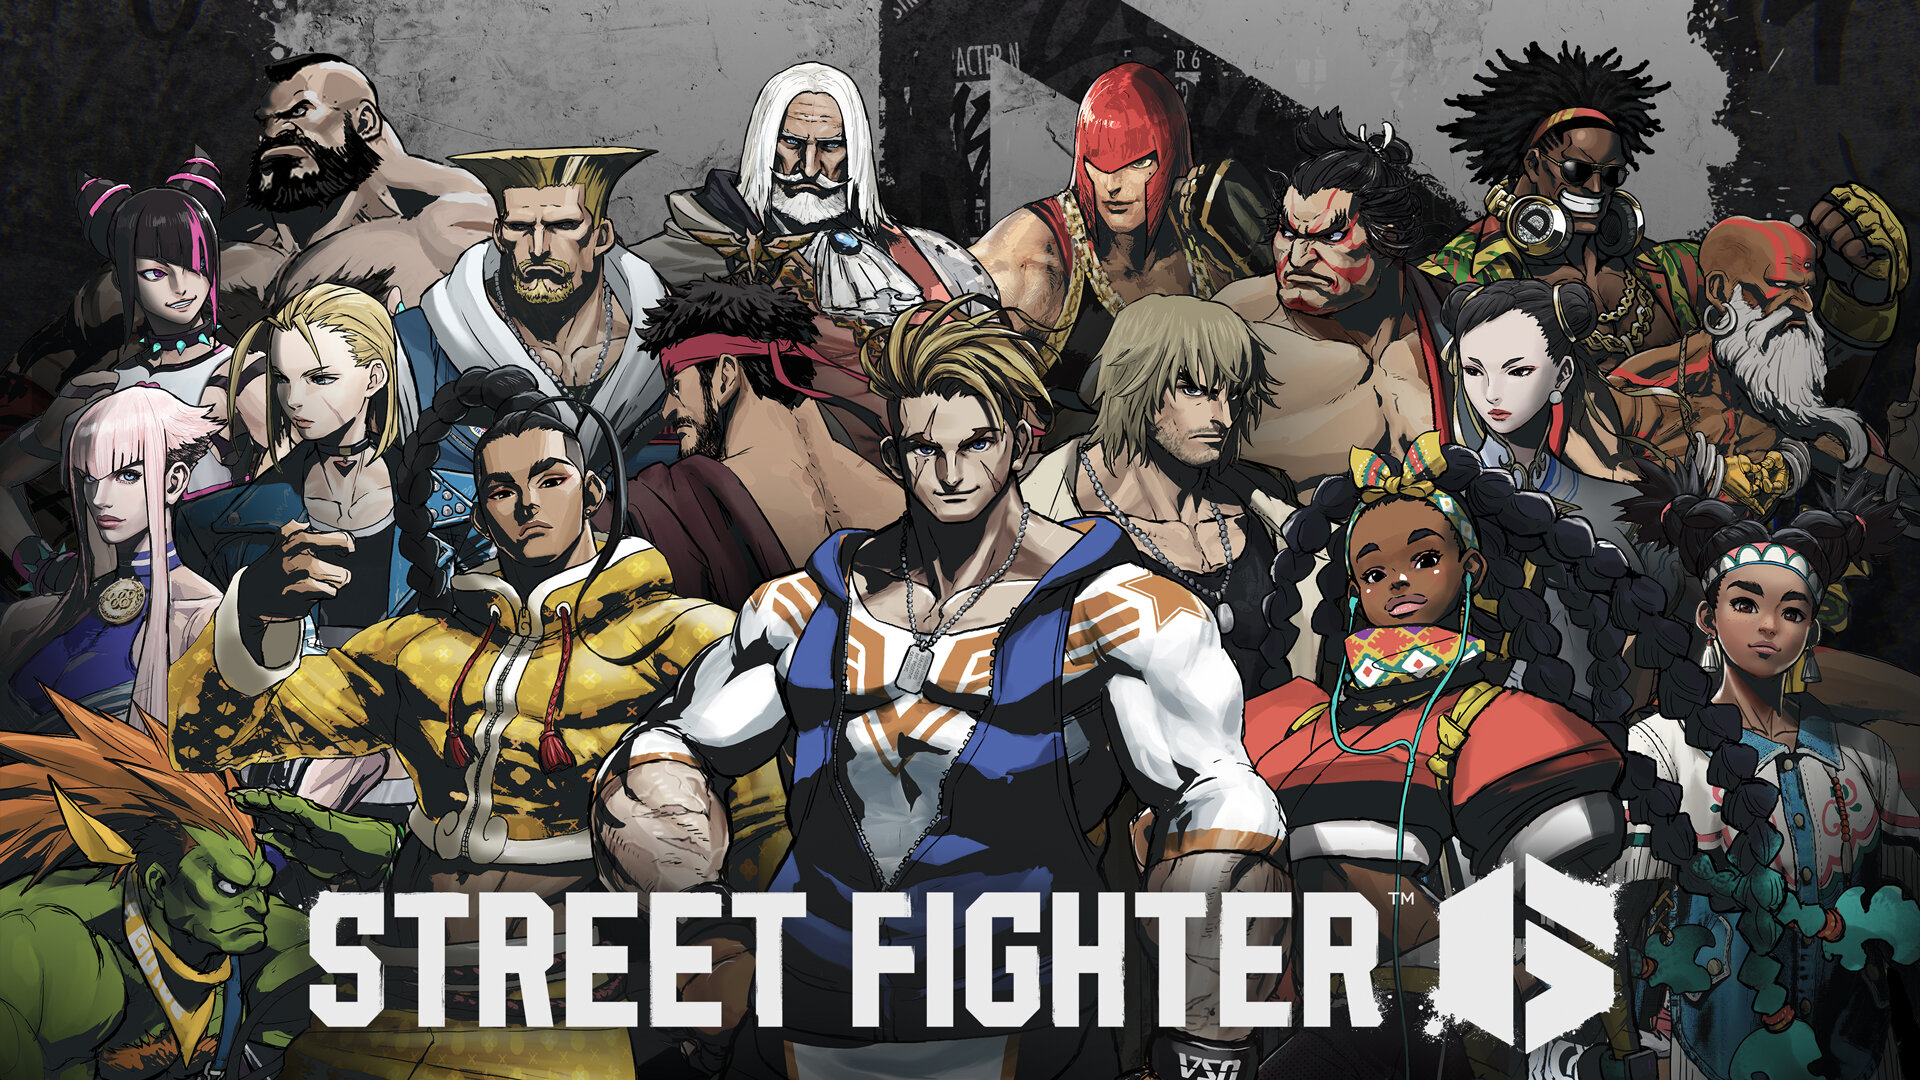 Street Fighter #1 See more